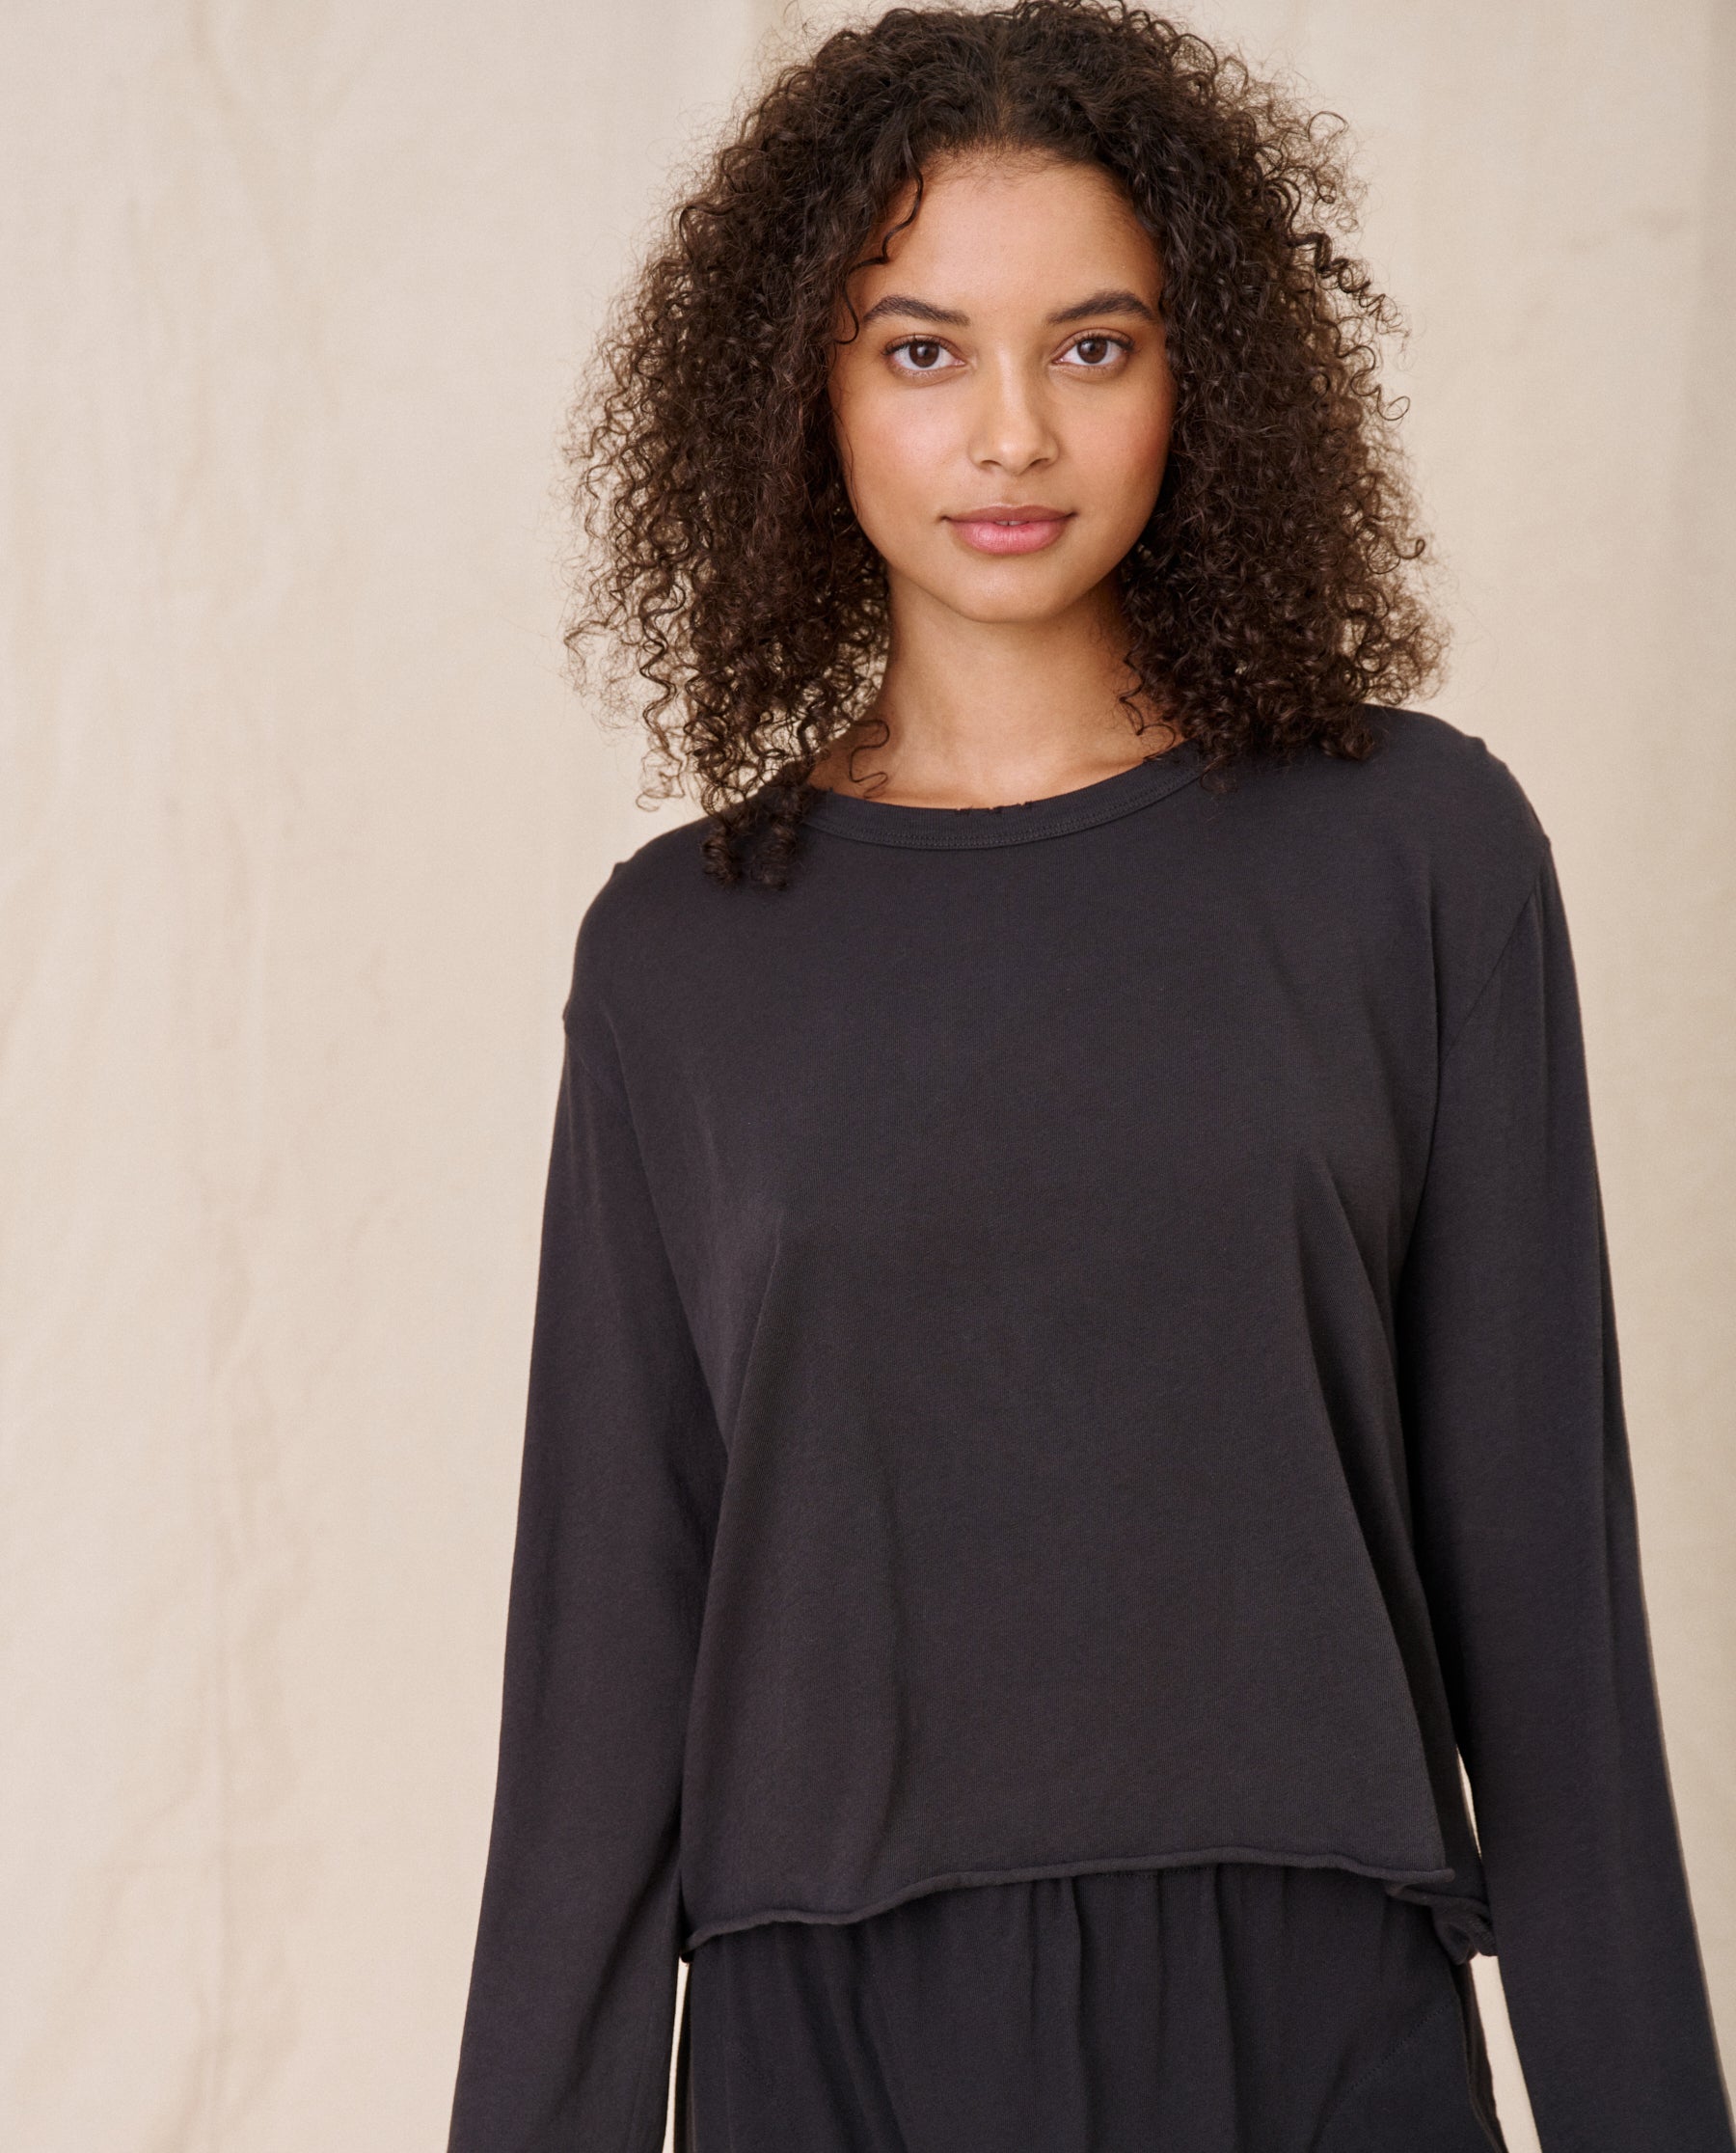 The Long Sleeve Crop Tee. -- Almost Black TEES THE GREAT. CORE KNITS